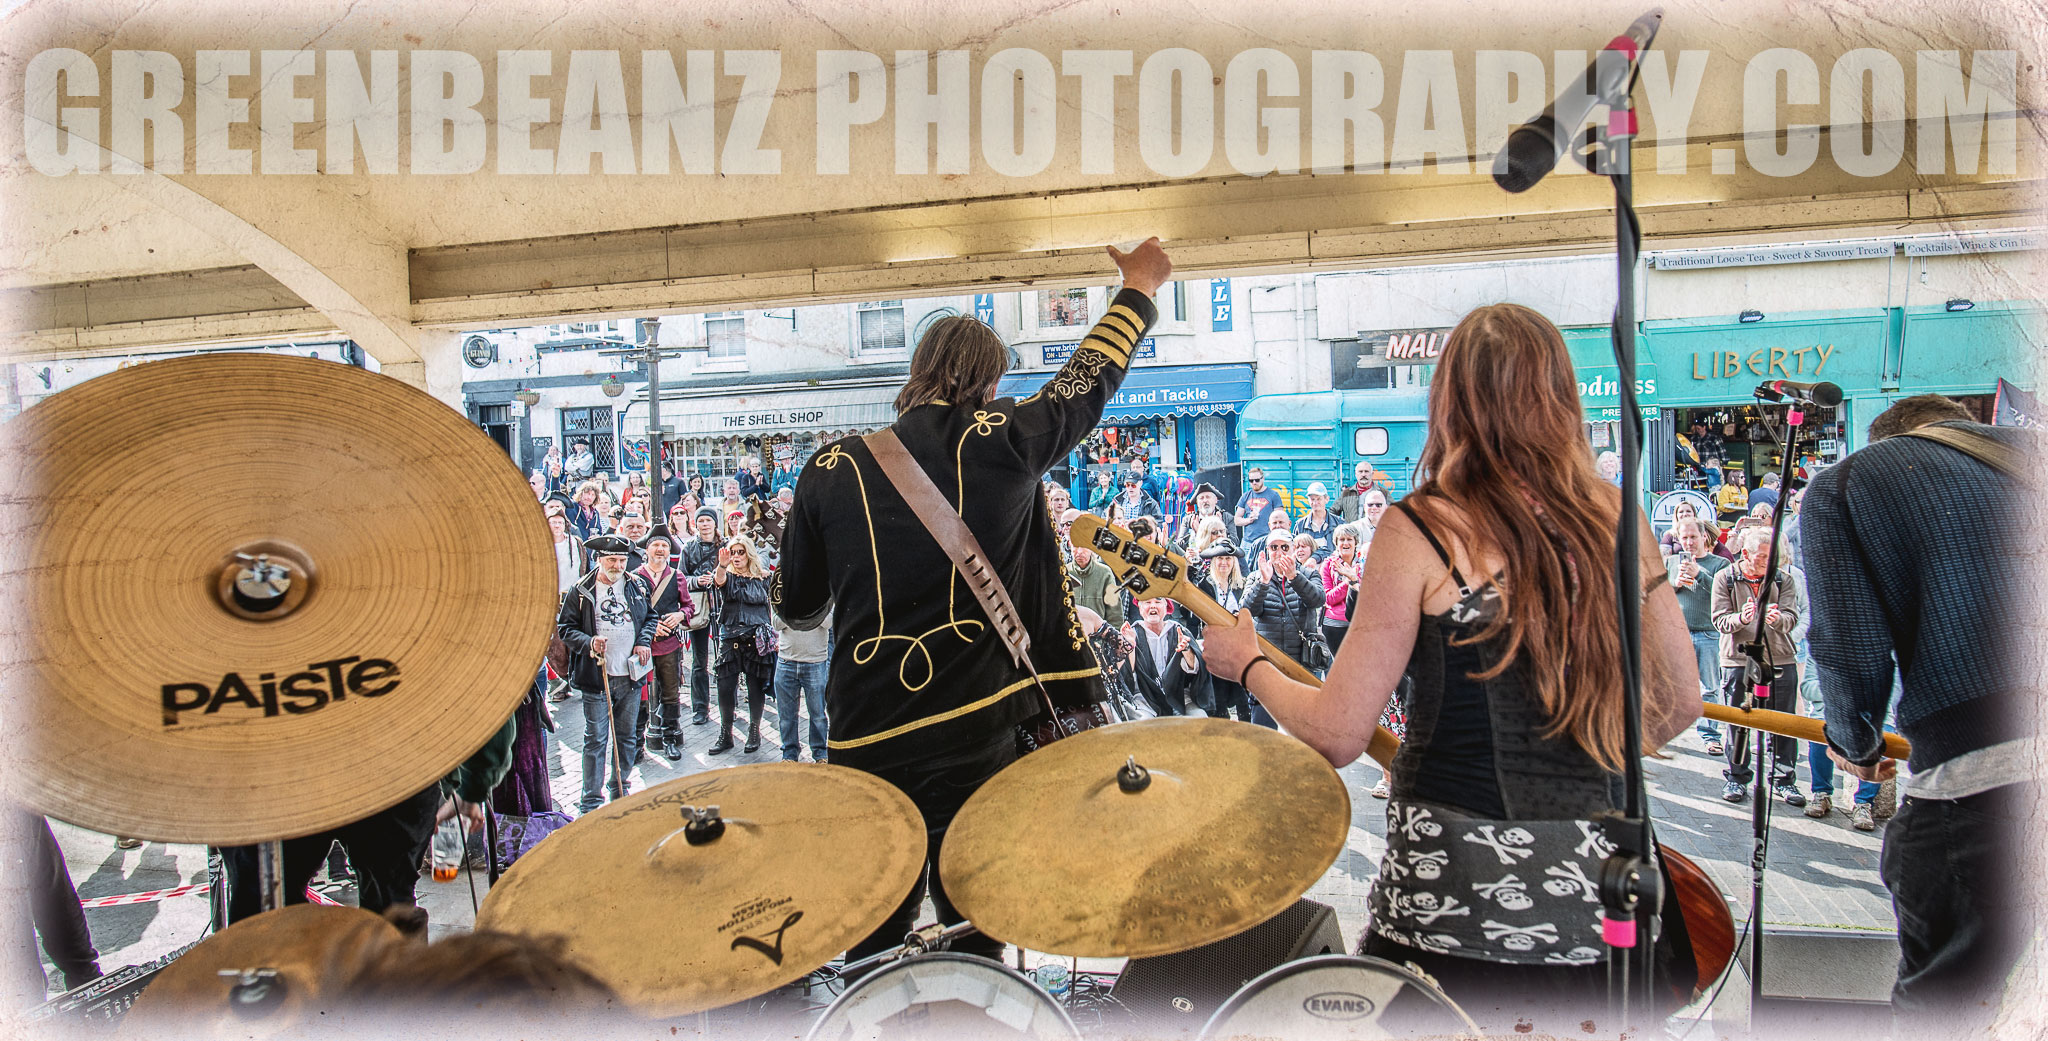 Black Friday salute the crowd on the final day of Brixam Pirate Festival 2019